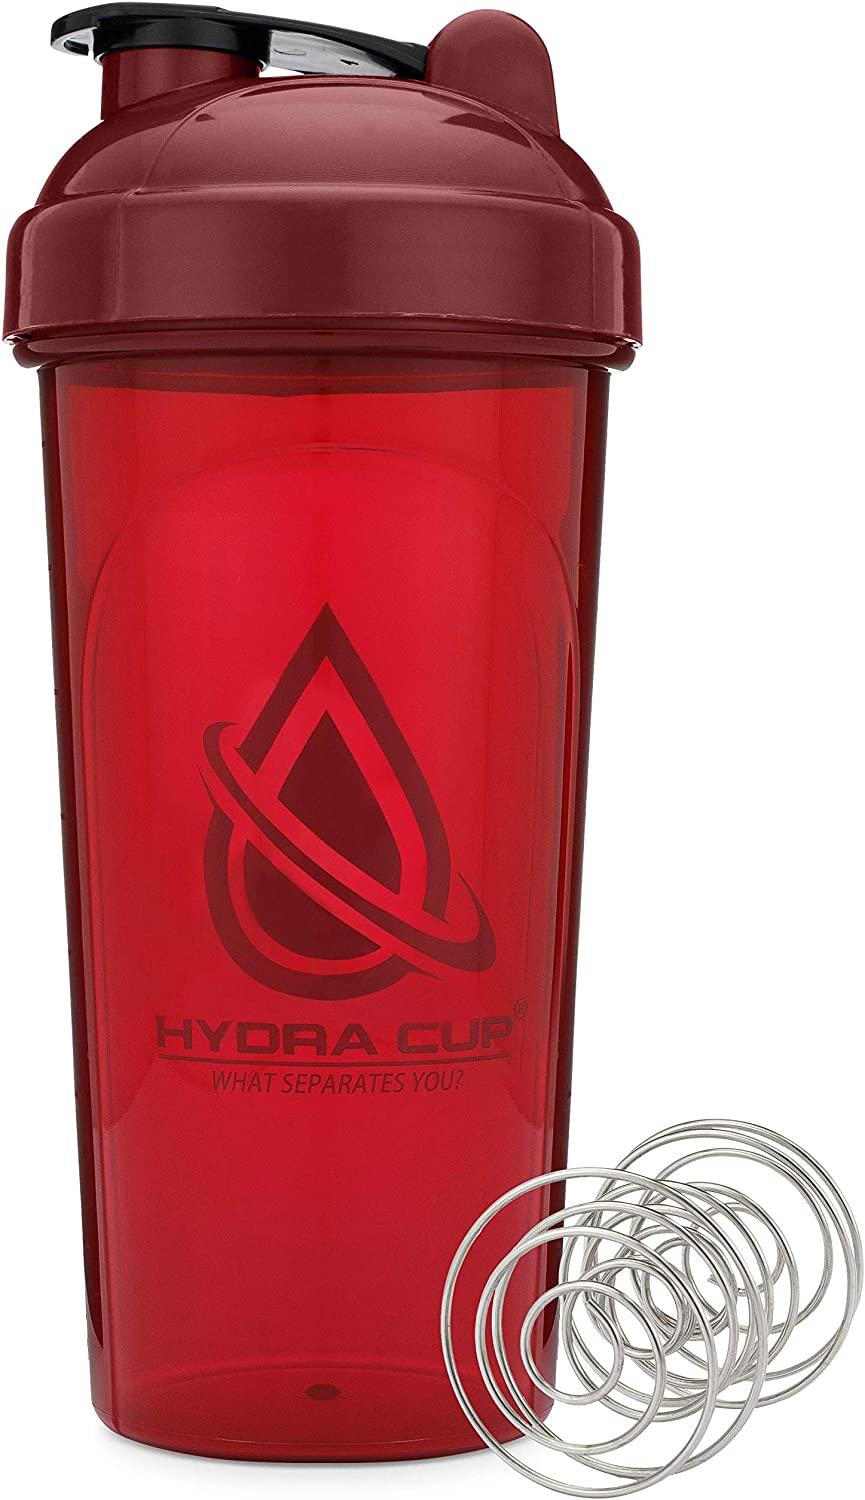 Hydra Cup Hydra cup 4 Pack] - Protein Powder Funnel & Three